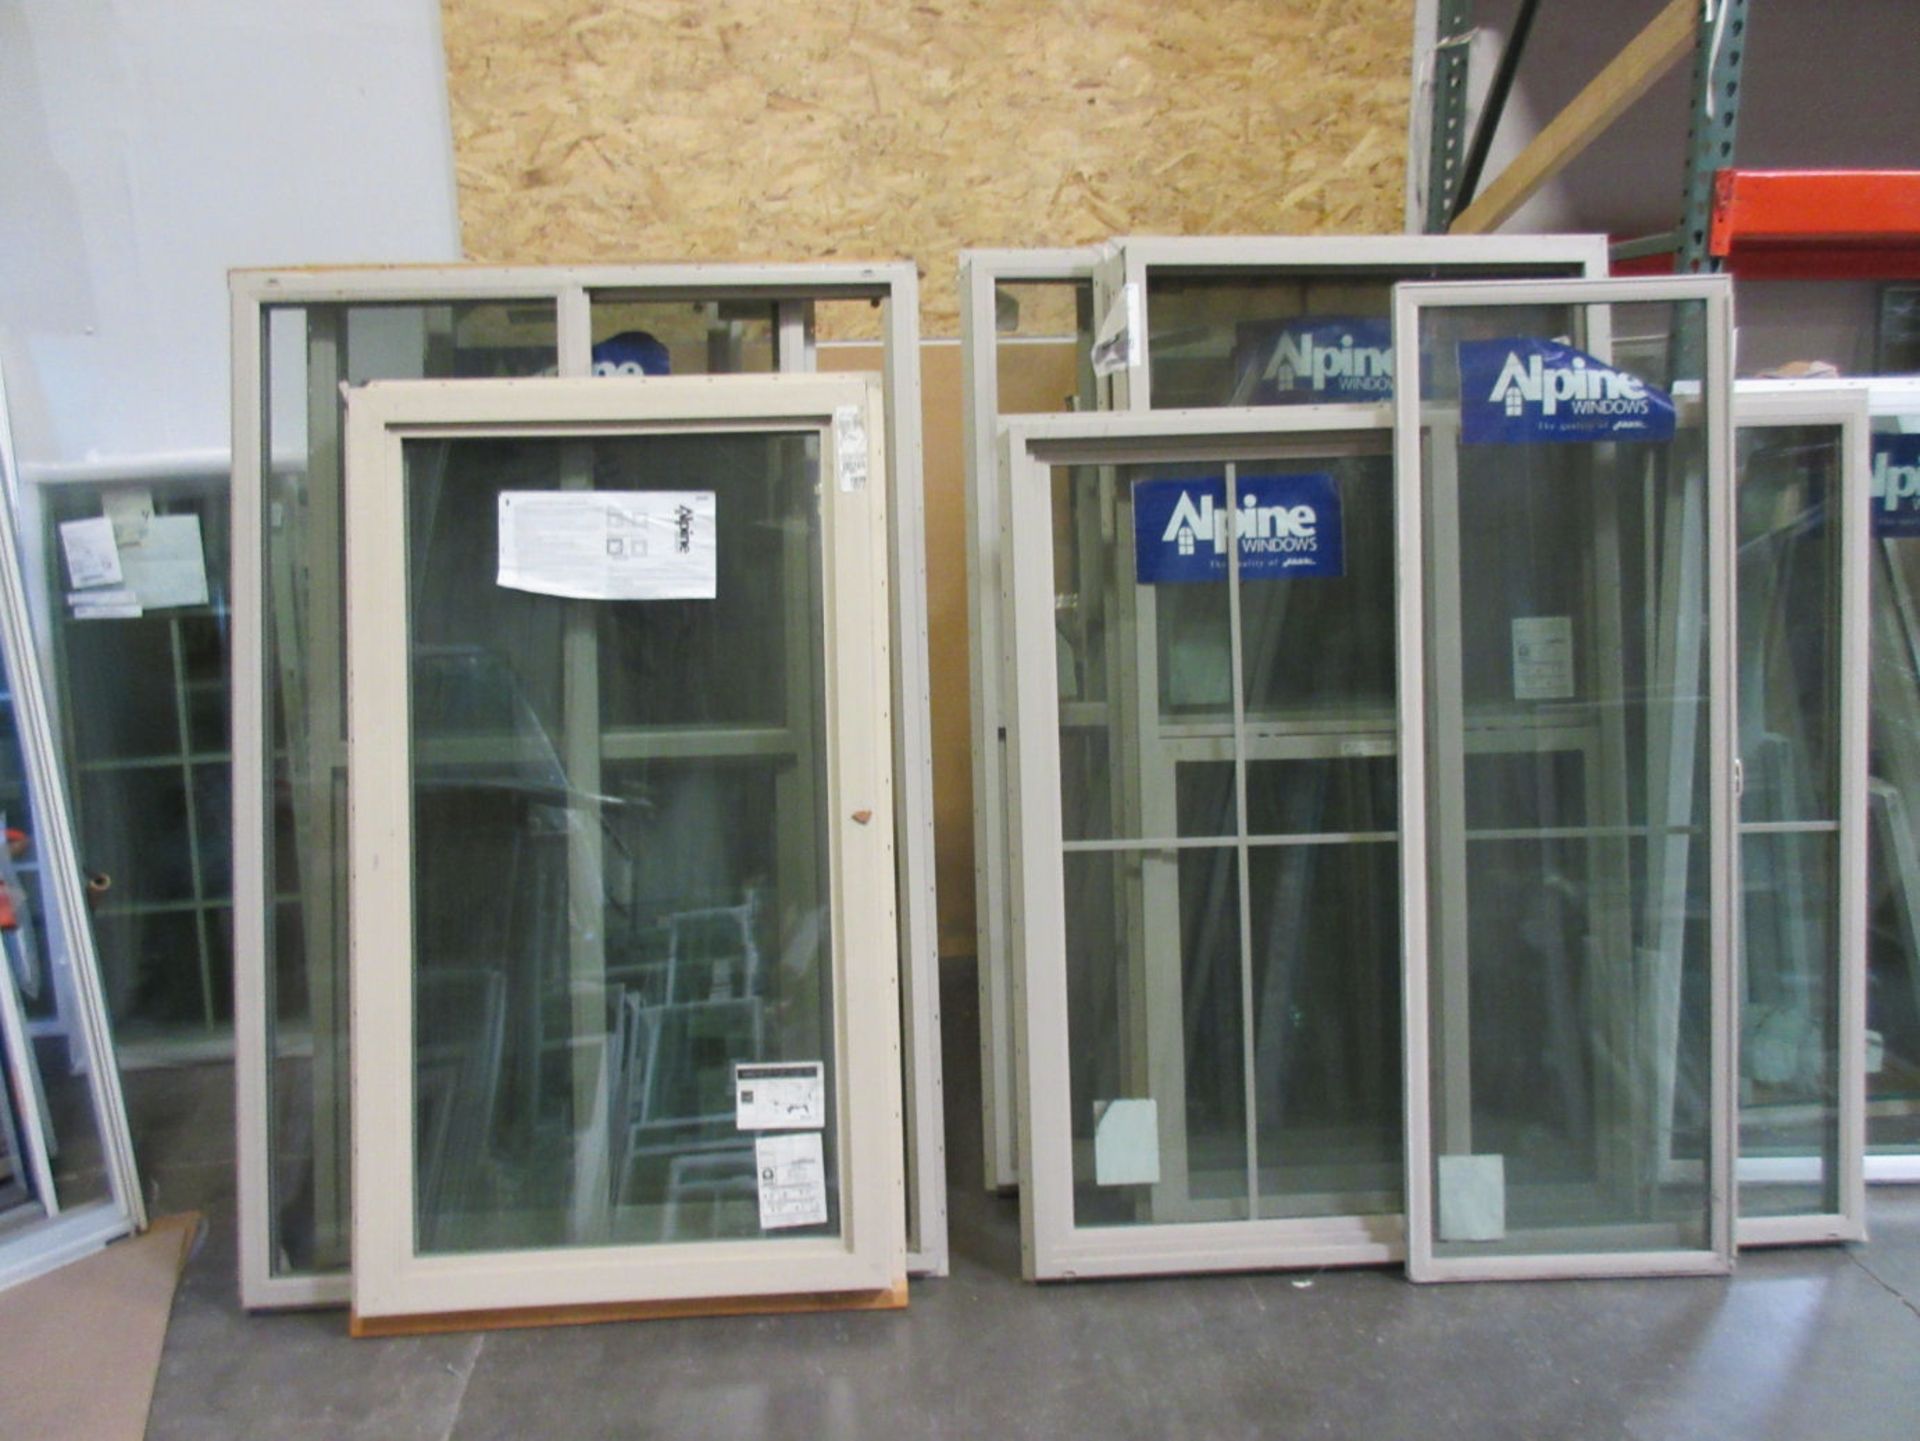 LOT - ALPINE DOORS AND WINDOWS. NEW, USED AND REMAKES.AUCTIONEER'S NOTE: PLEASE SEE INVENTORY